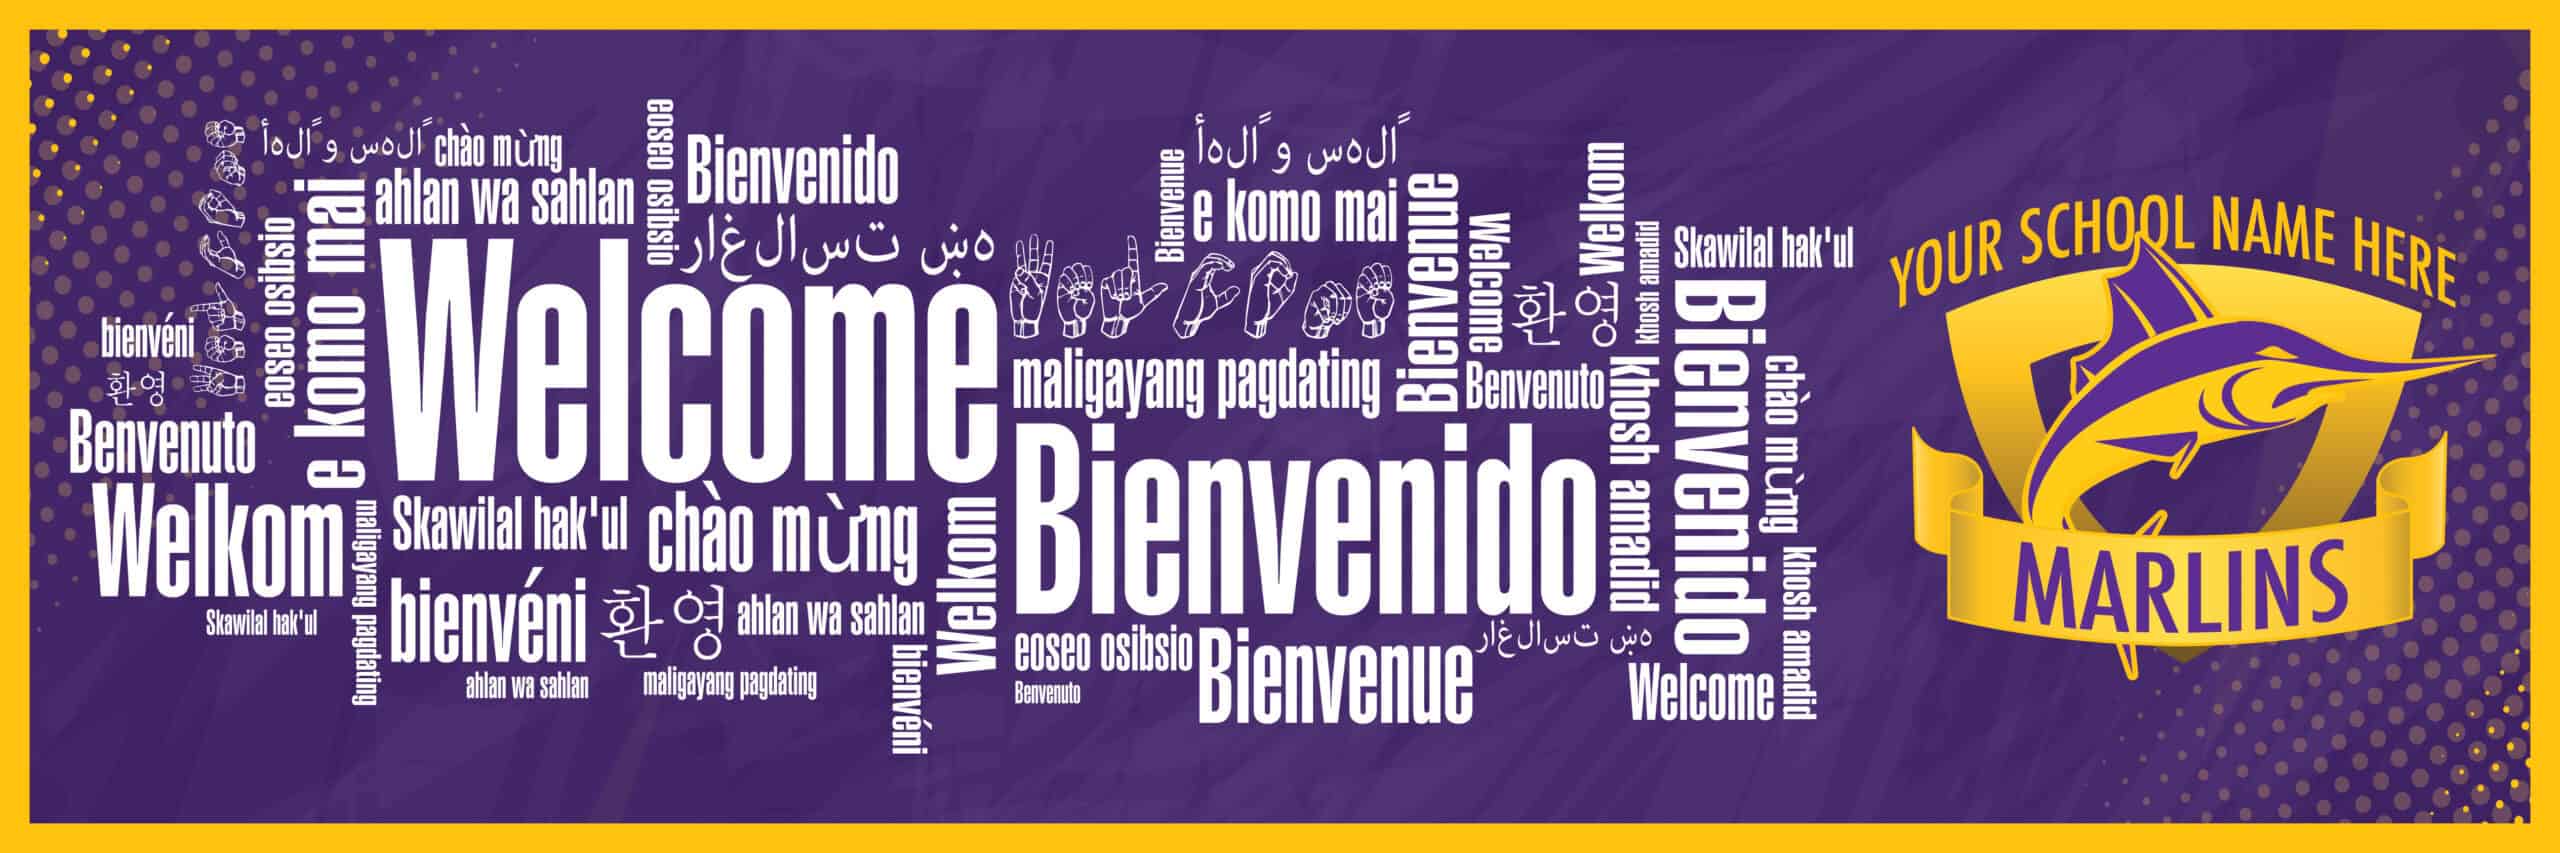 Inclusive-Welcome-Banner-marlin